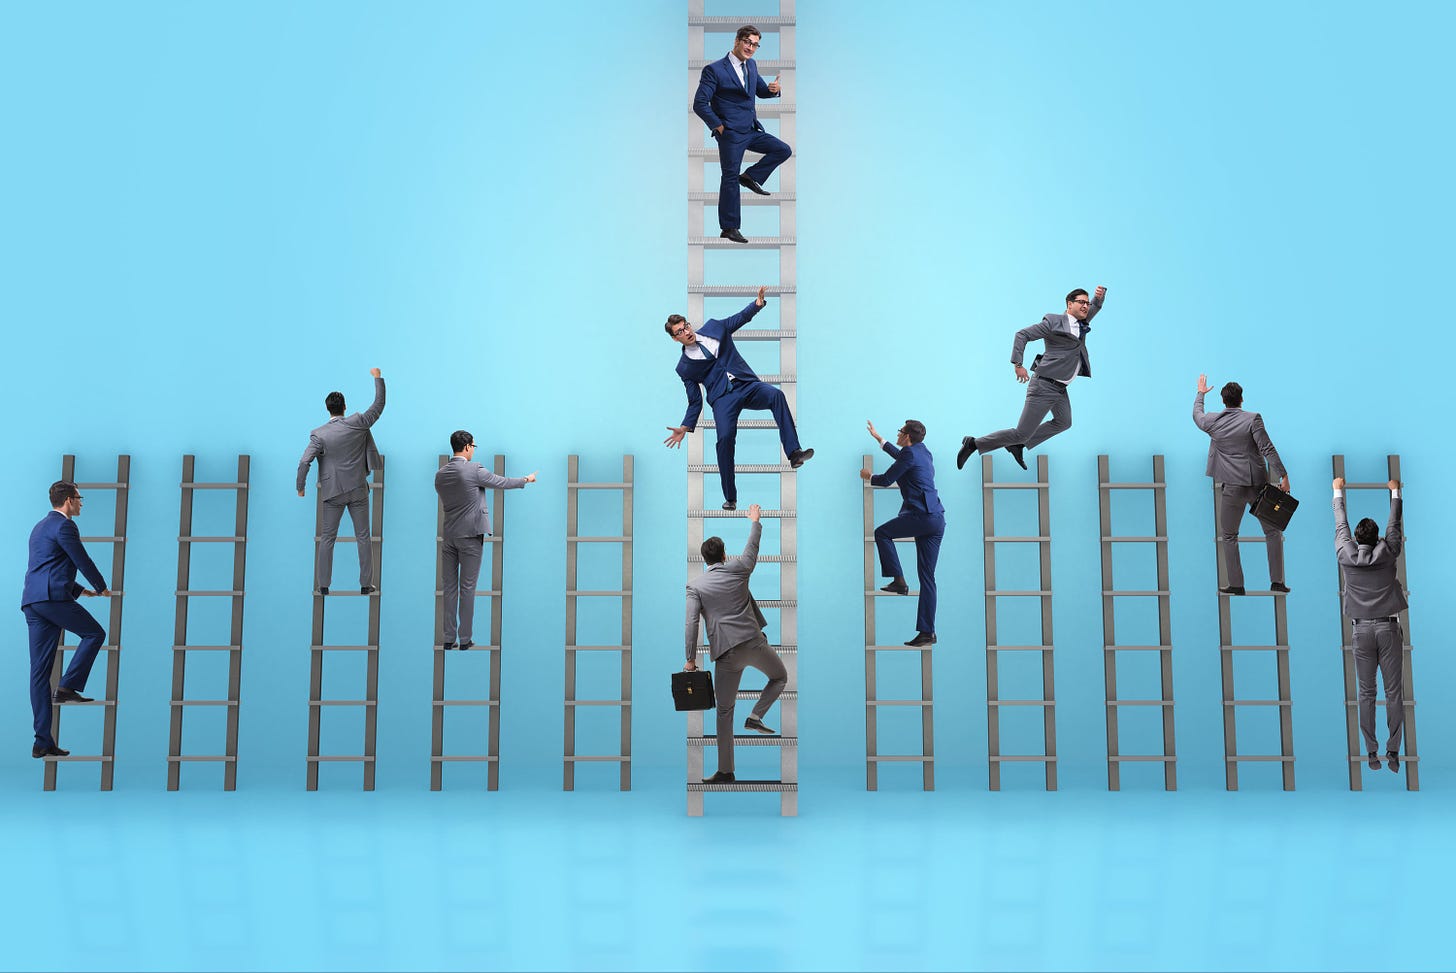 How to Climb the Corporate Ladder - 11 Keys to Career Success